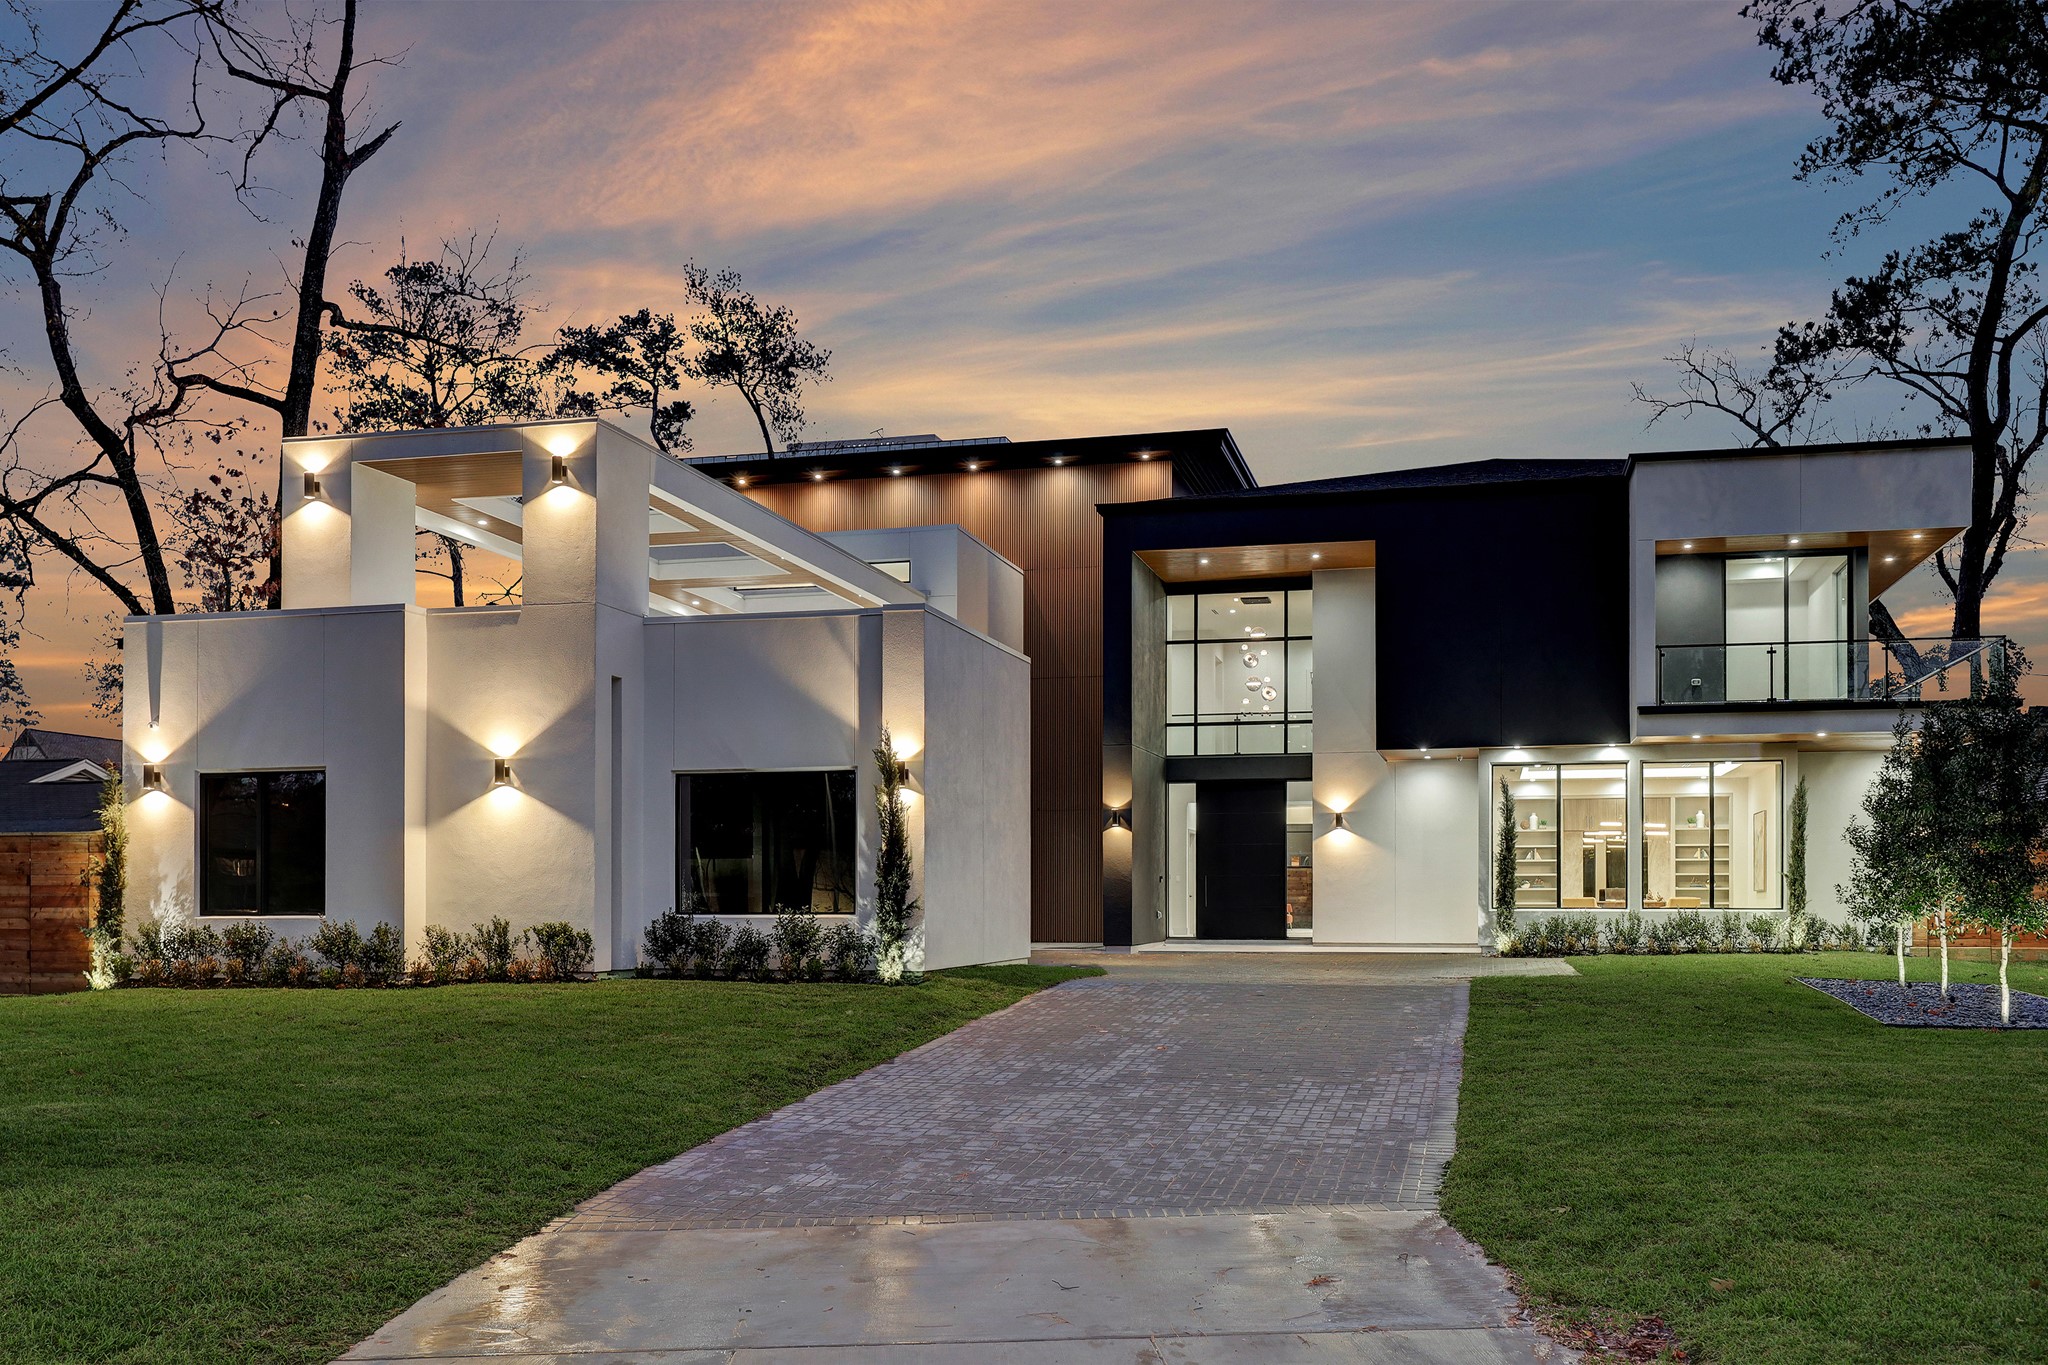 Extensive exterior lighting and manicured landscaping add exceptional curb appeal to the 7,860-square-foot residence.